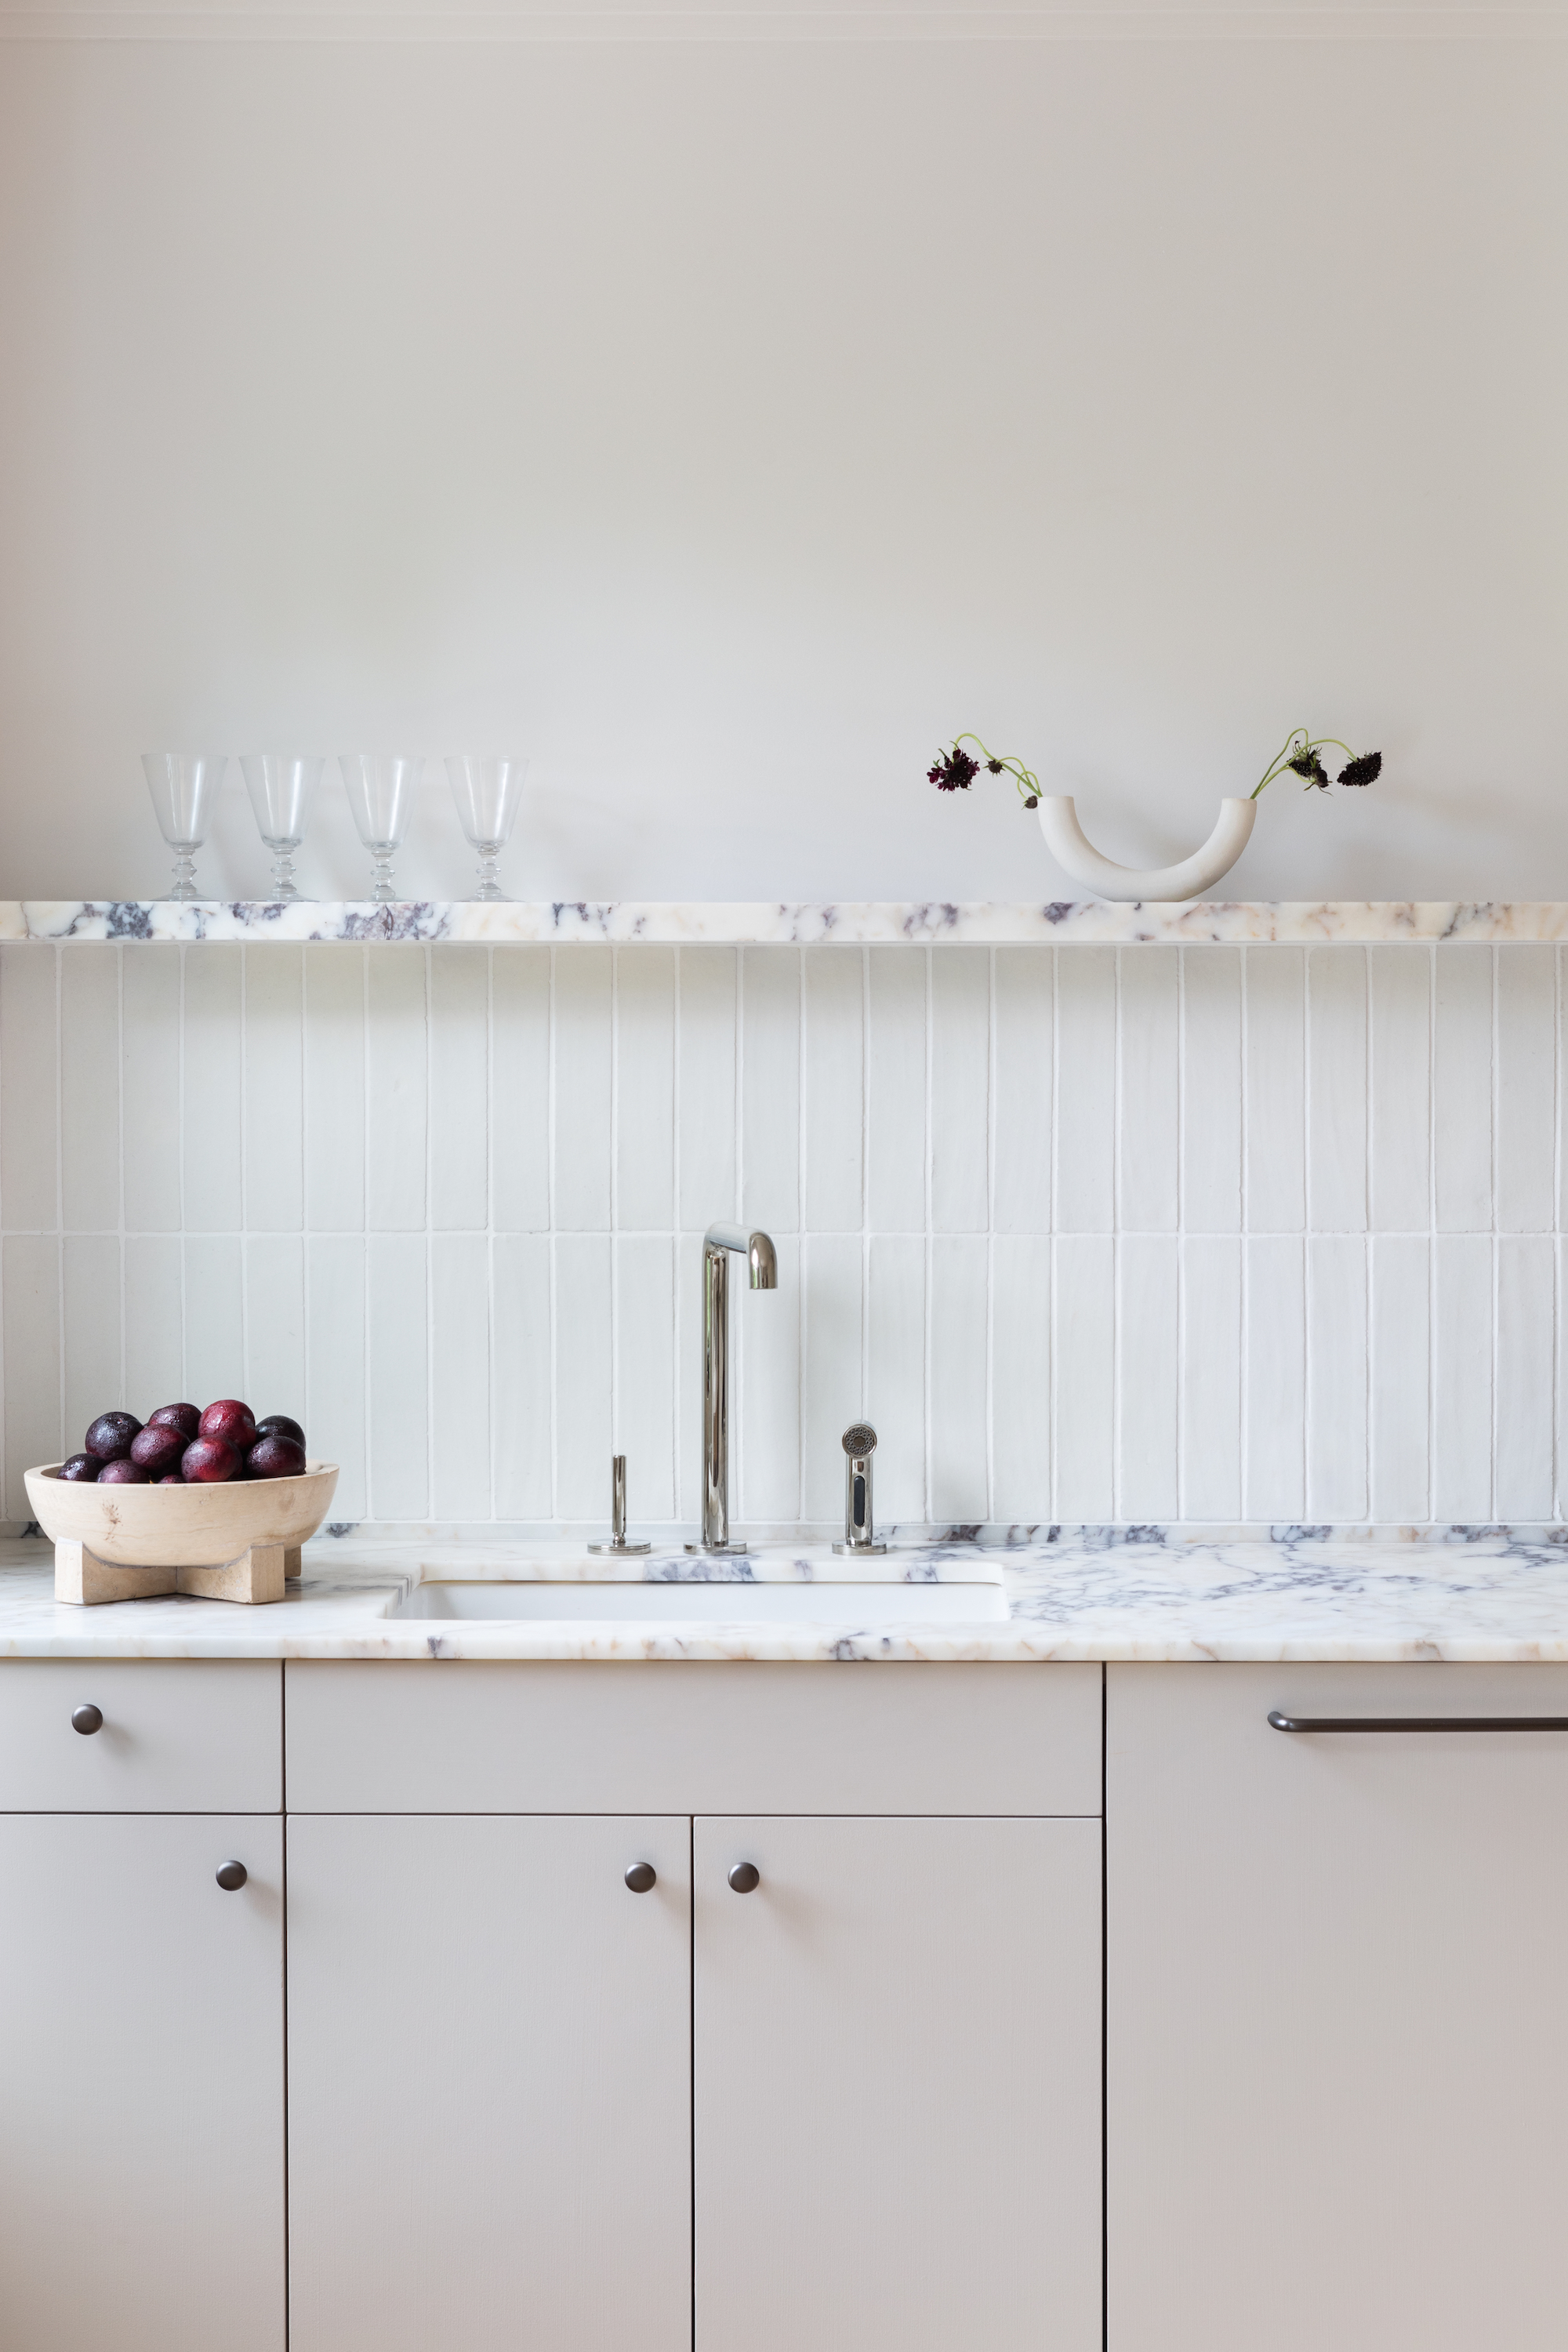 Kitchen of the Week A Clean, Well Lighted Space in Boerum Hill ...